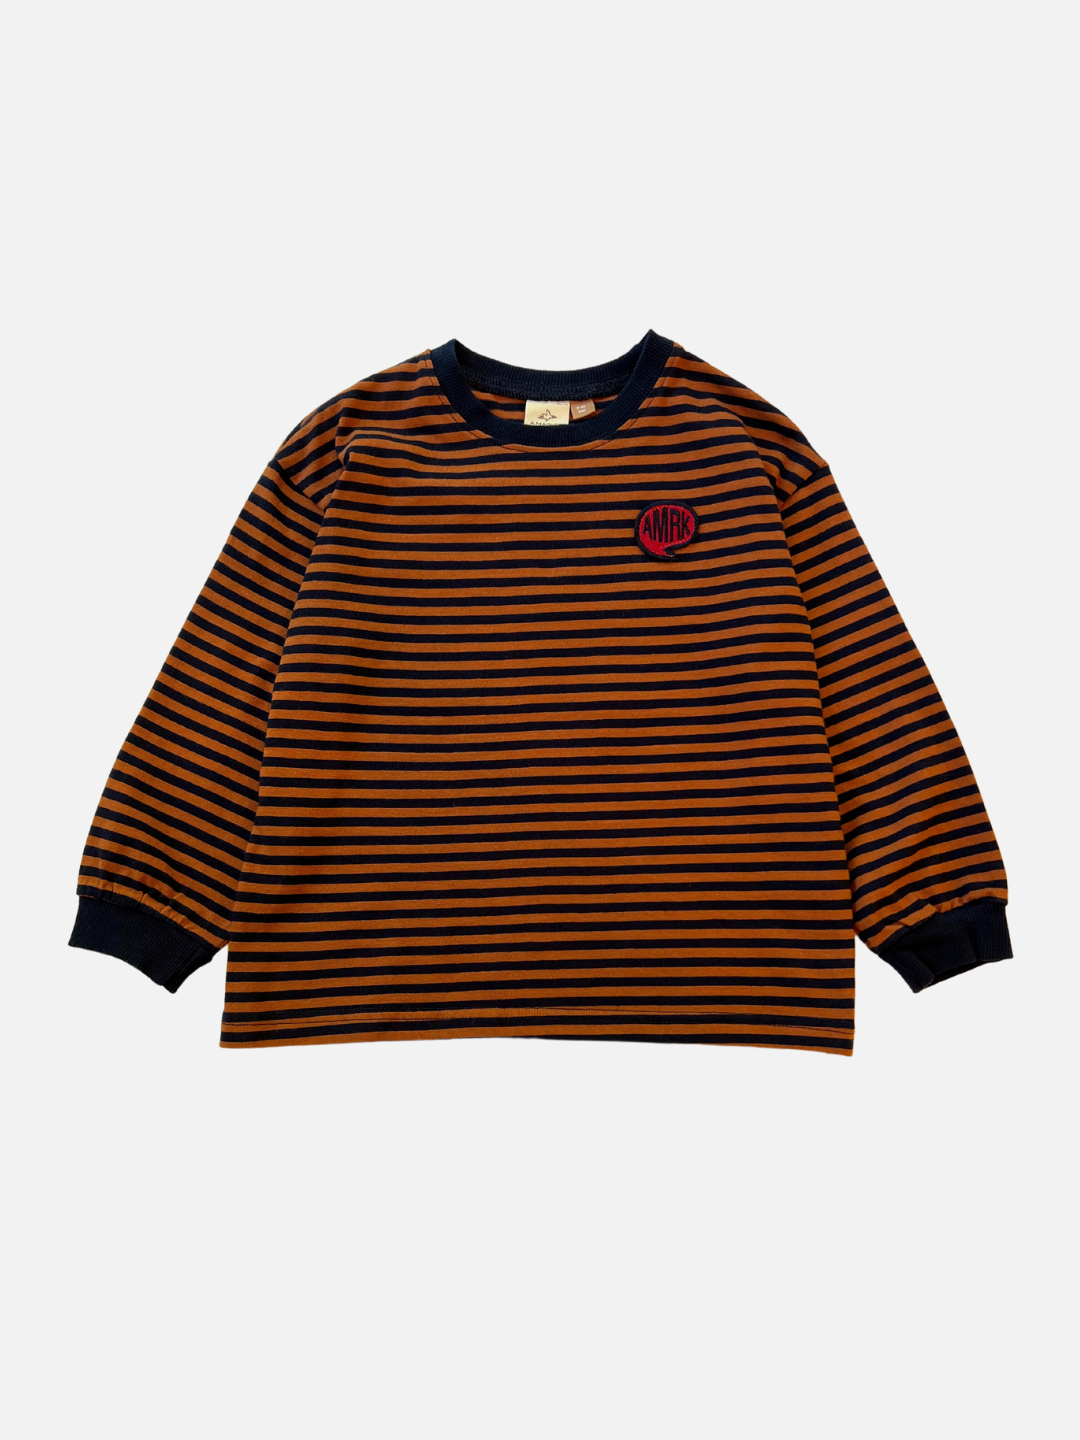 Comma Striped Longsleeve in Rust/Navy front view